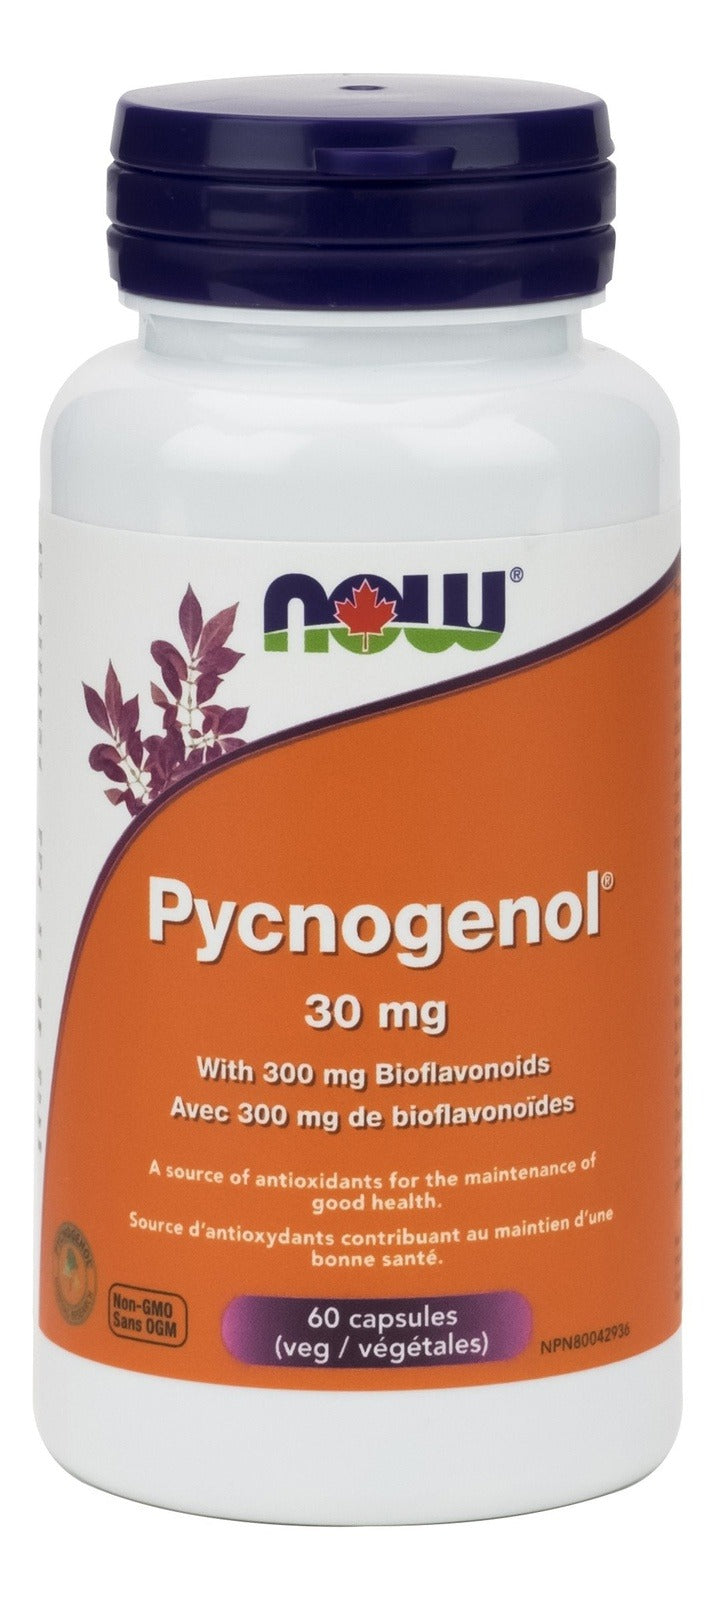 NOW Pycnogenol 30 mg with Bioflavonoids 60 VCaps Image 1